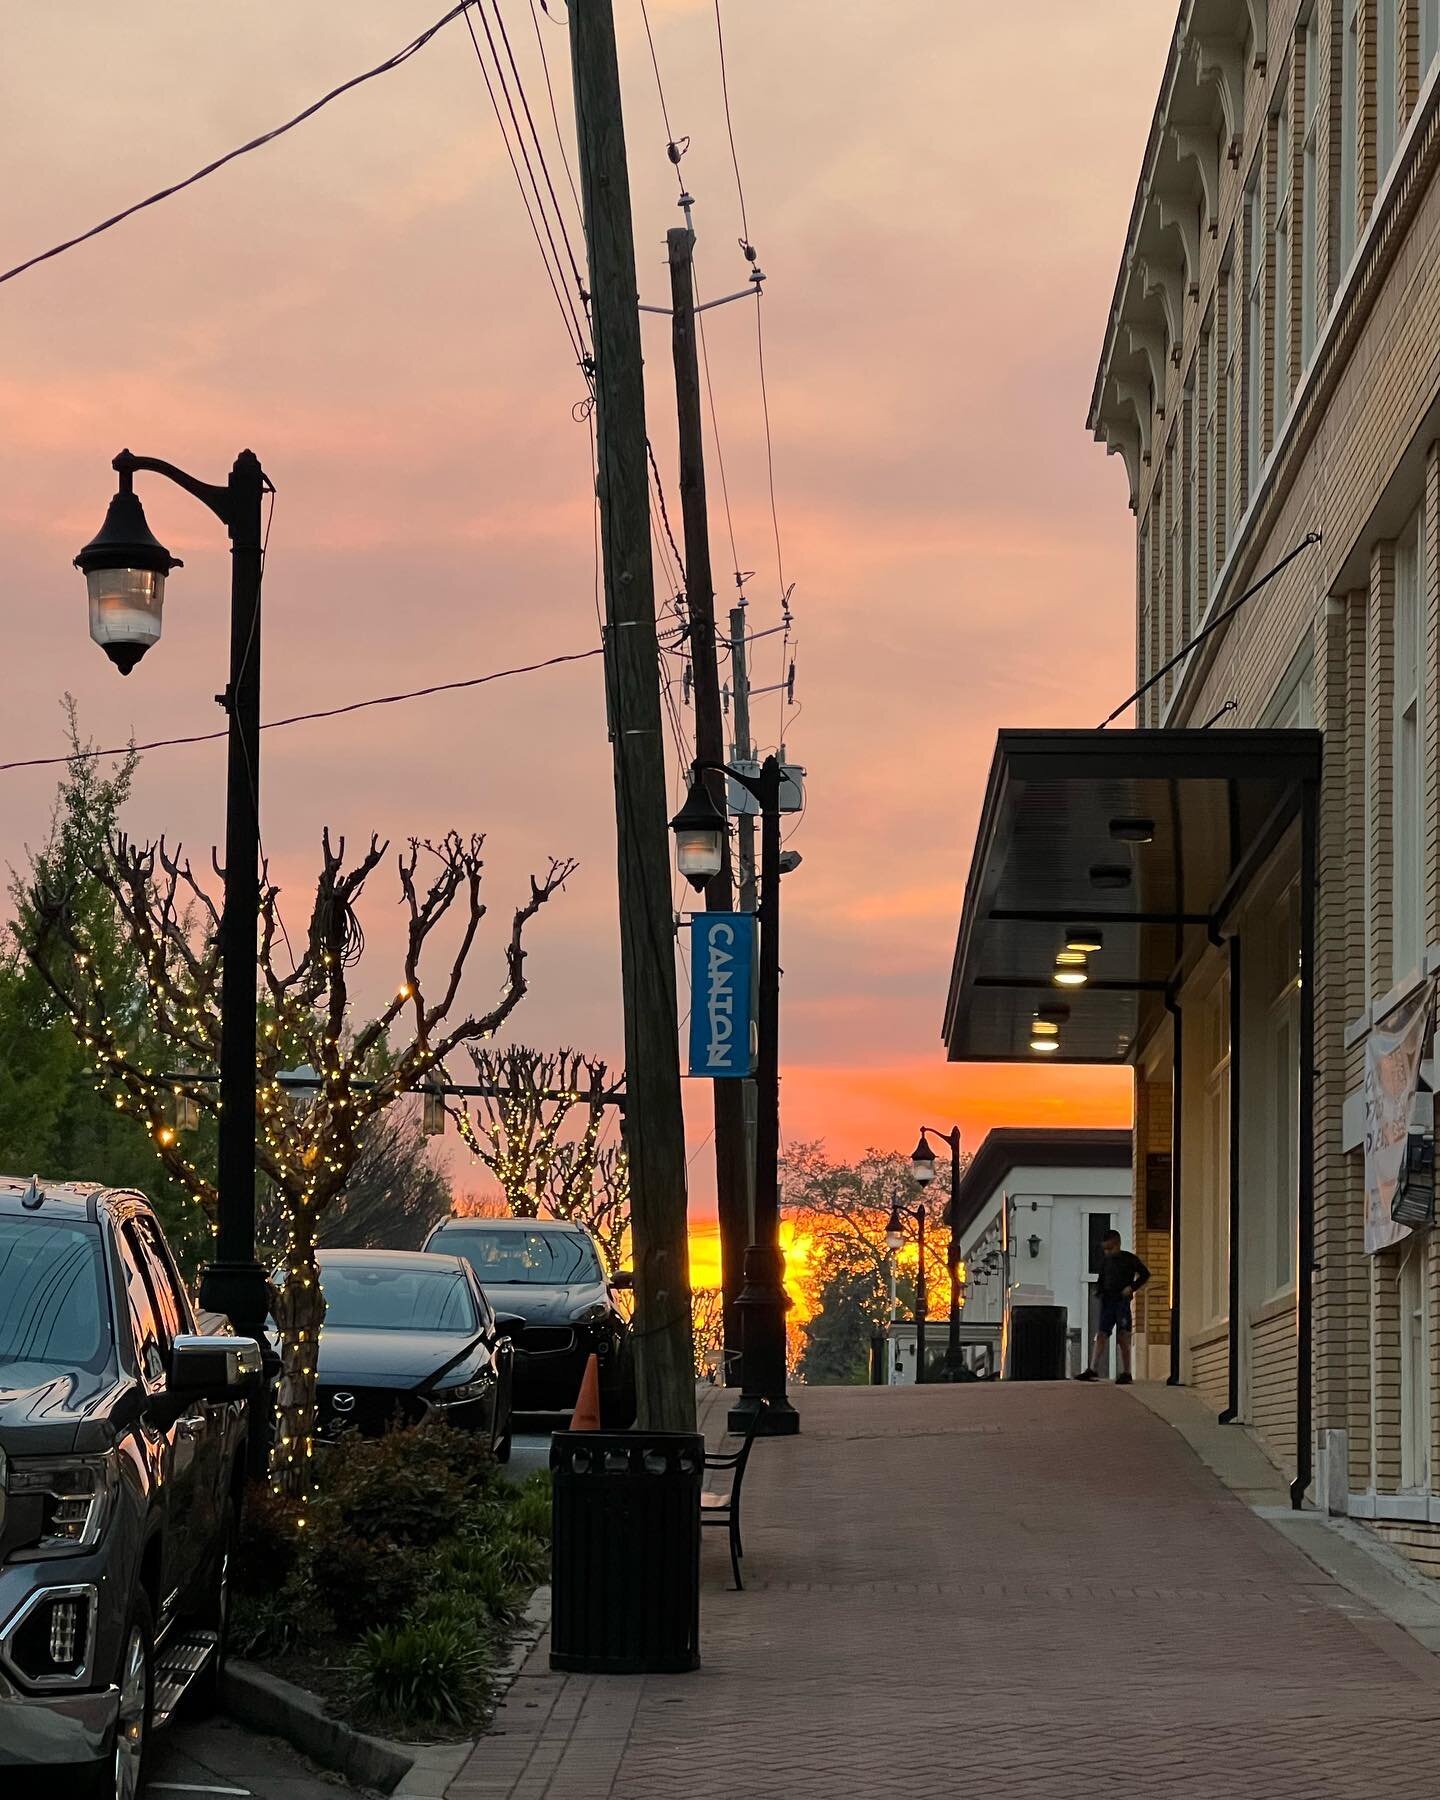 Nothin&rsquo; better than sunsets in @cityofcantonga 🌅🩵🍻 #GreenLineBrewery